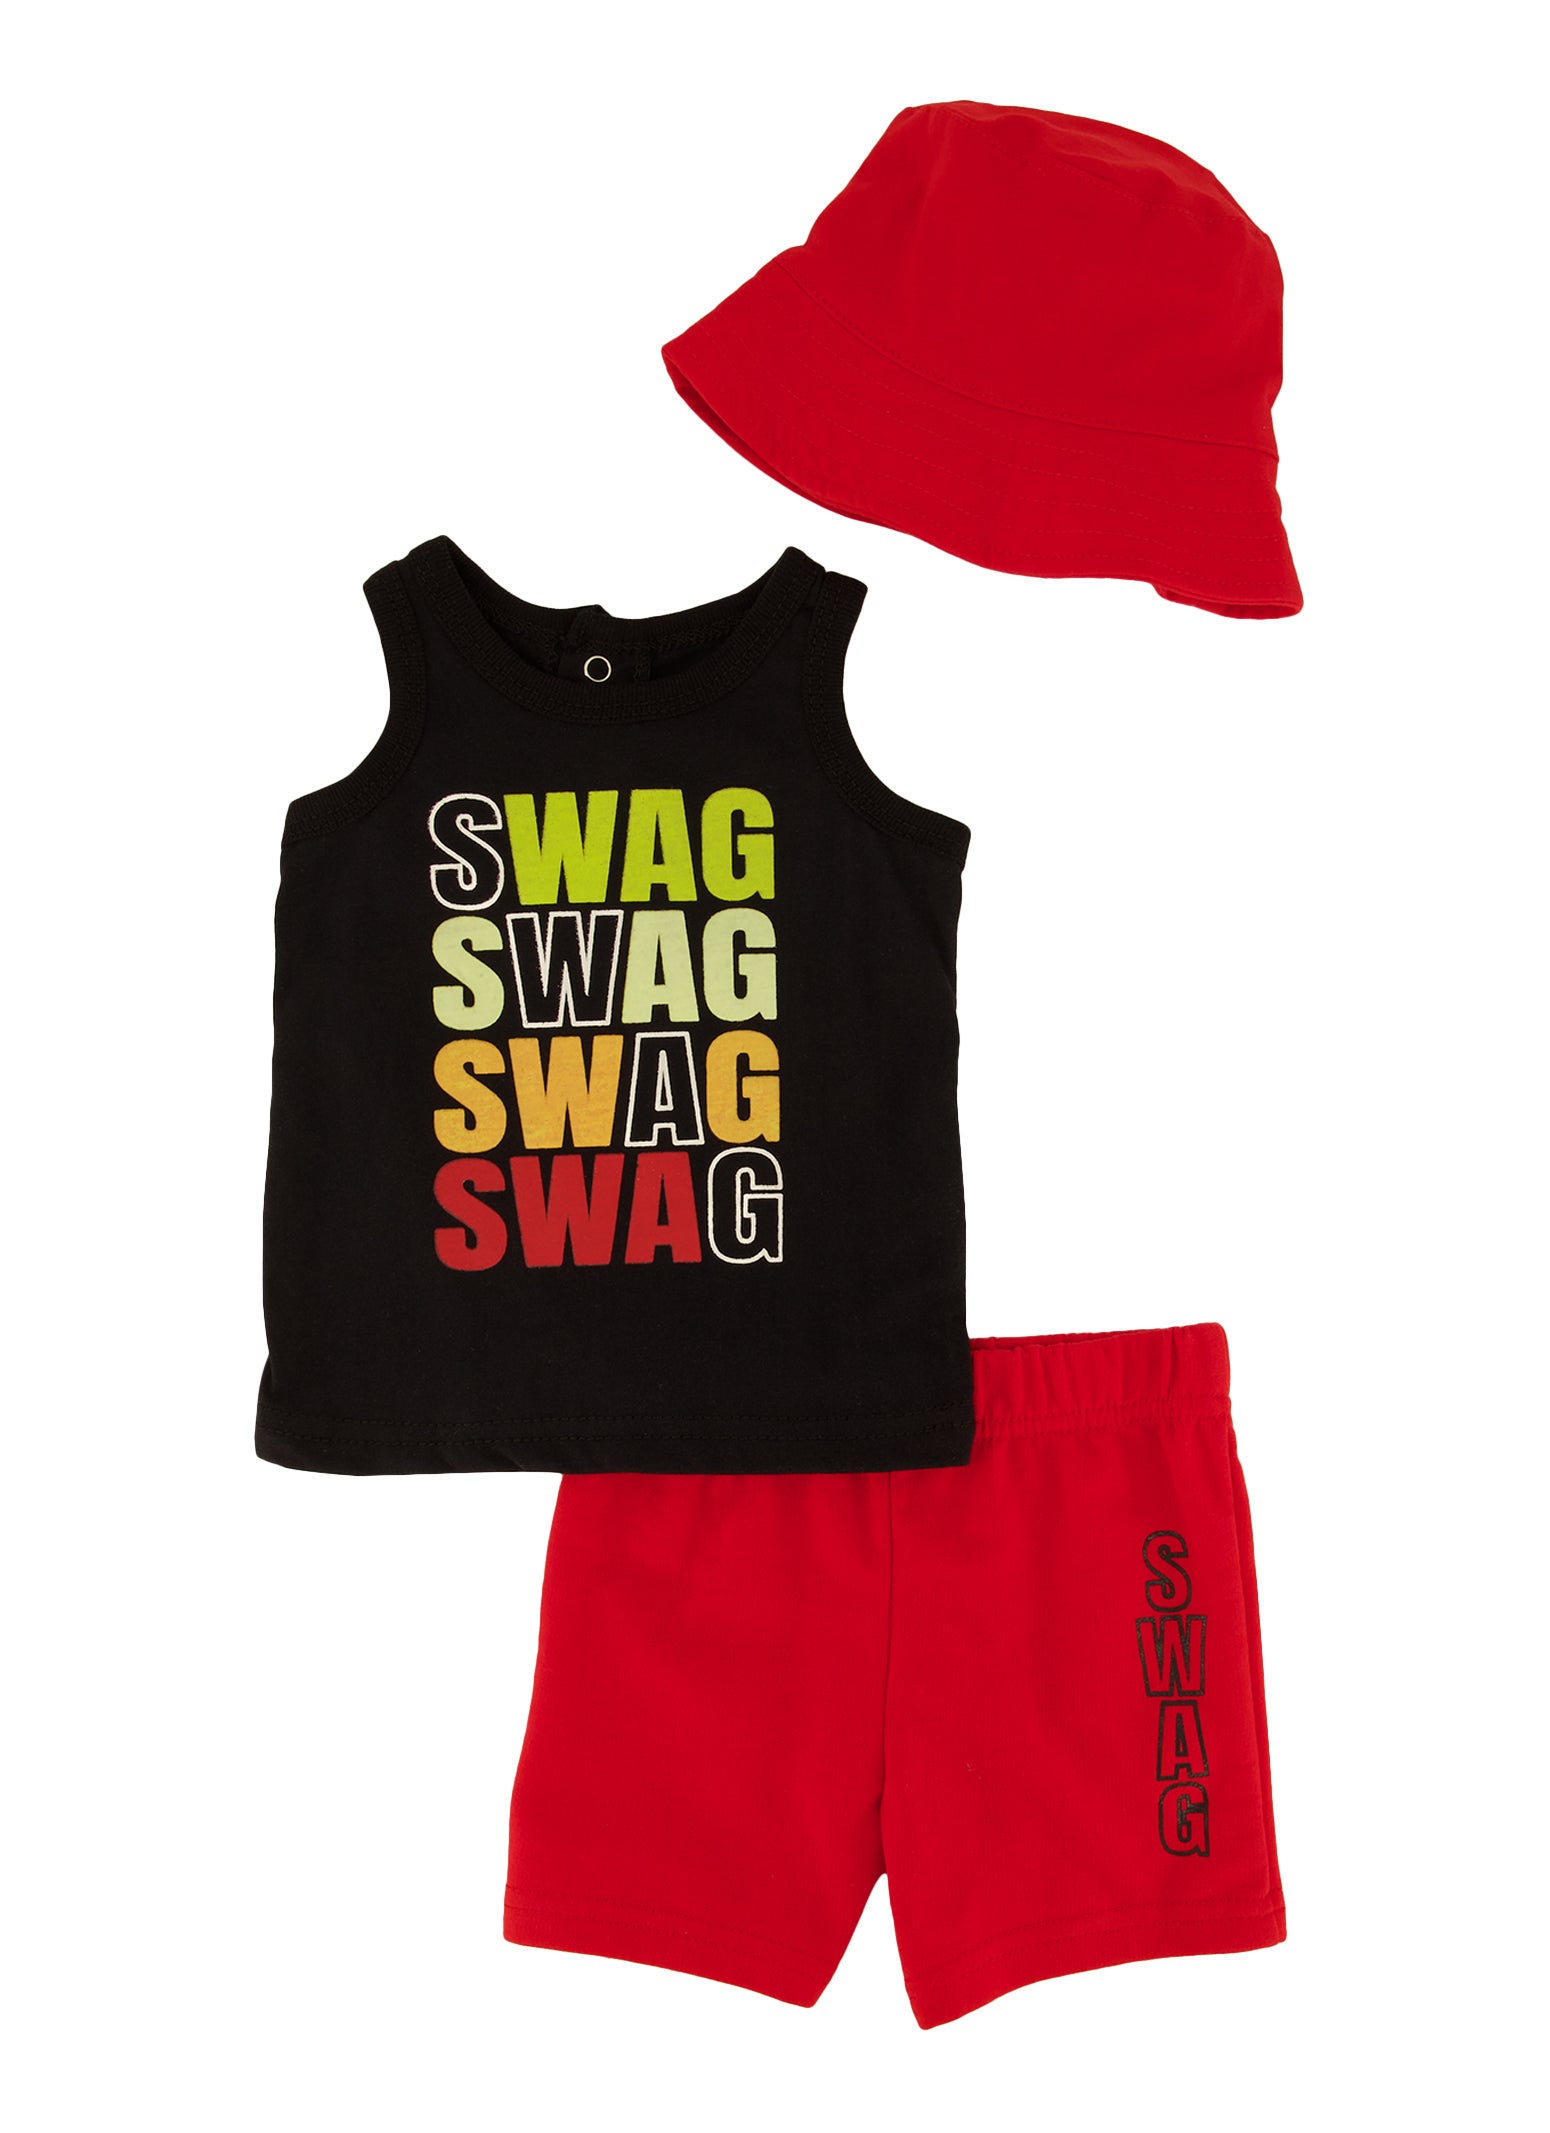 Baby Boys 0-9M Swag Graphic Tank Top and Shorts, Multi, Size 6-9M